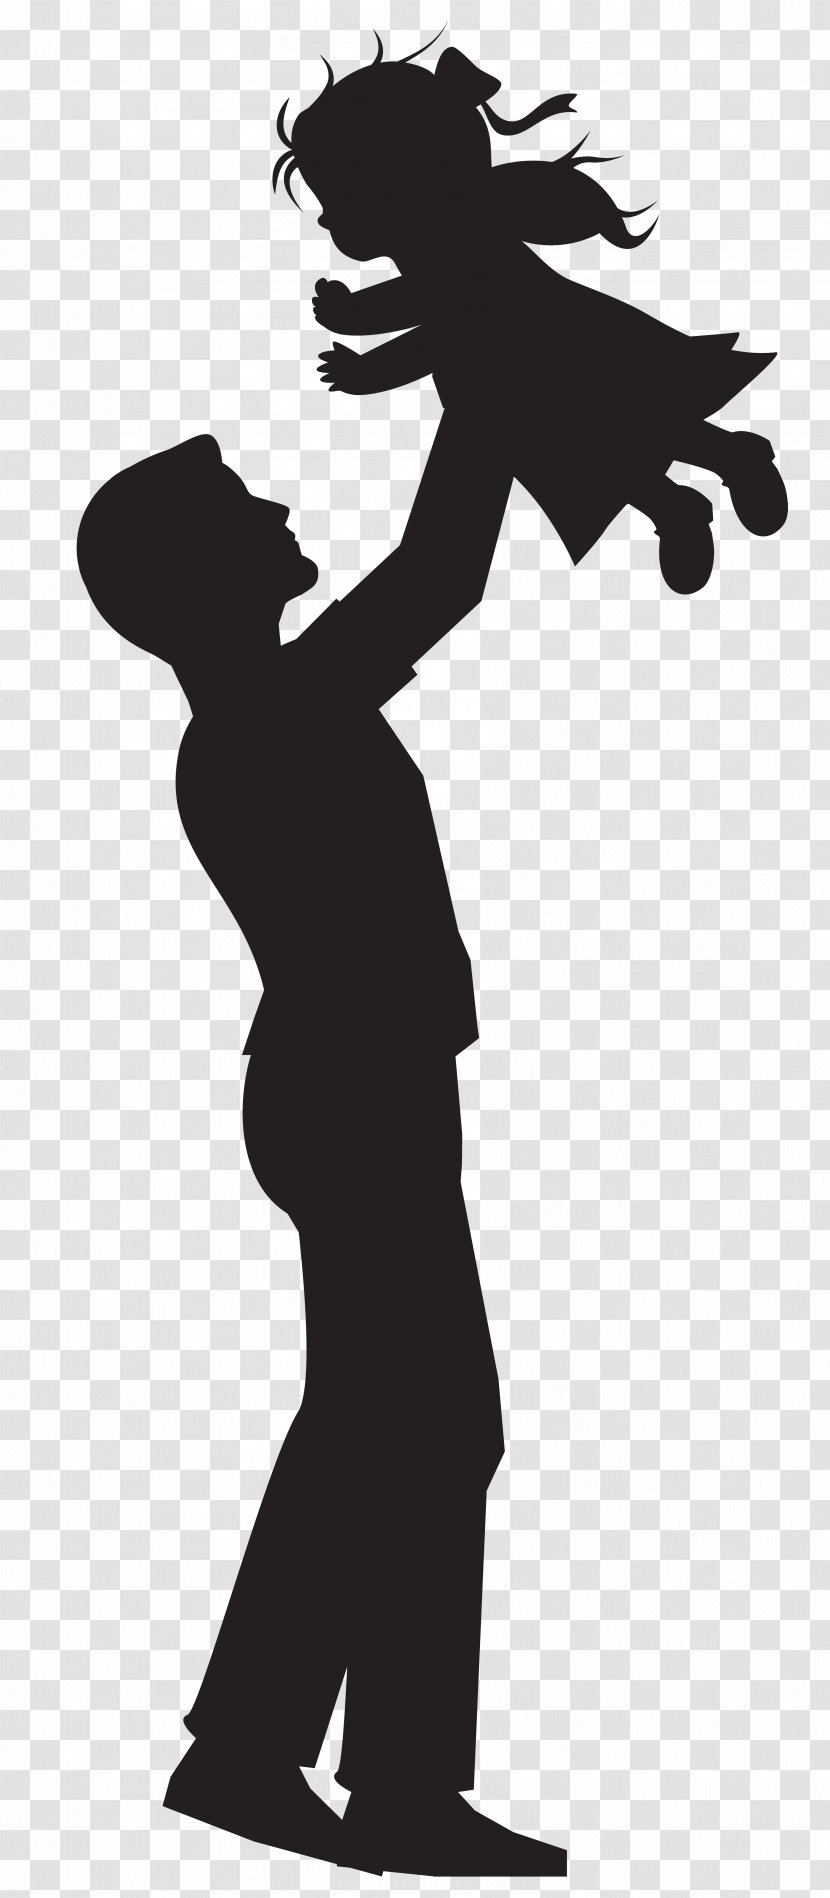 Father-daughter Dance Silhouette Clip Art - Male - Father Transparent PNG